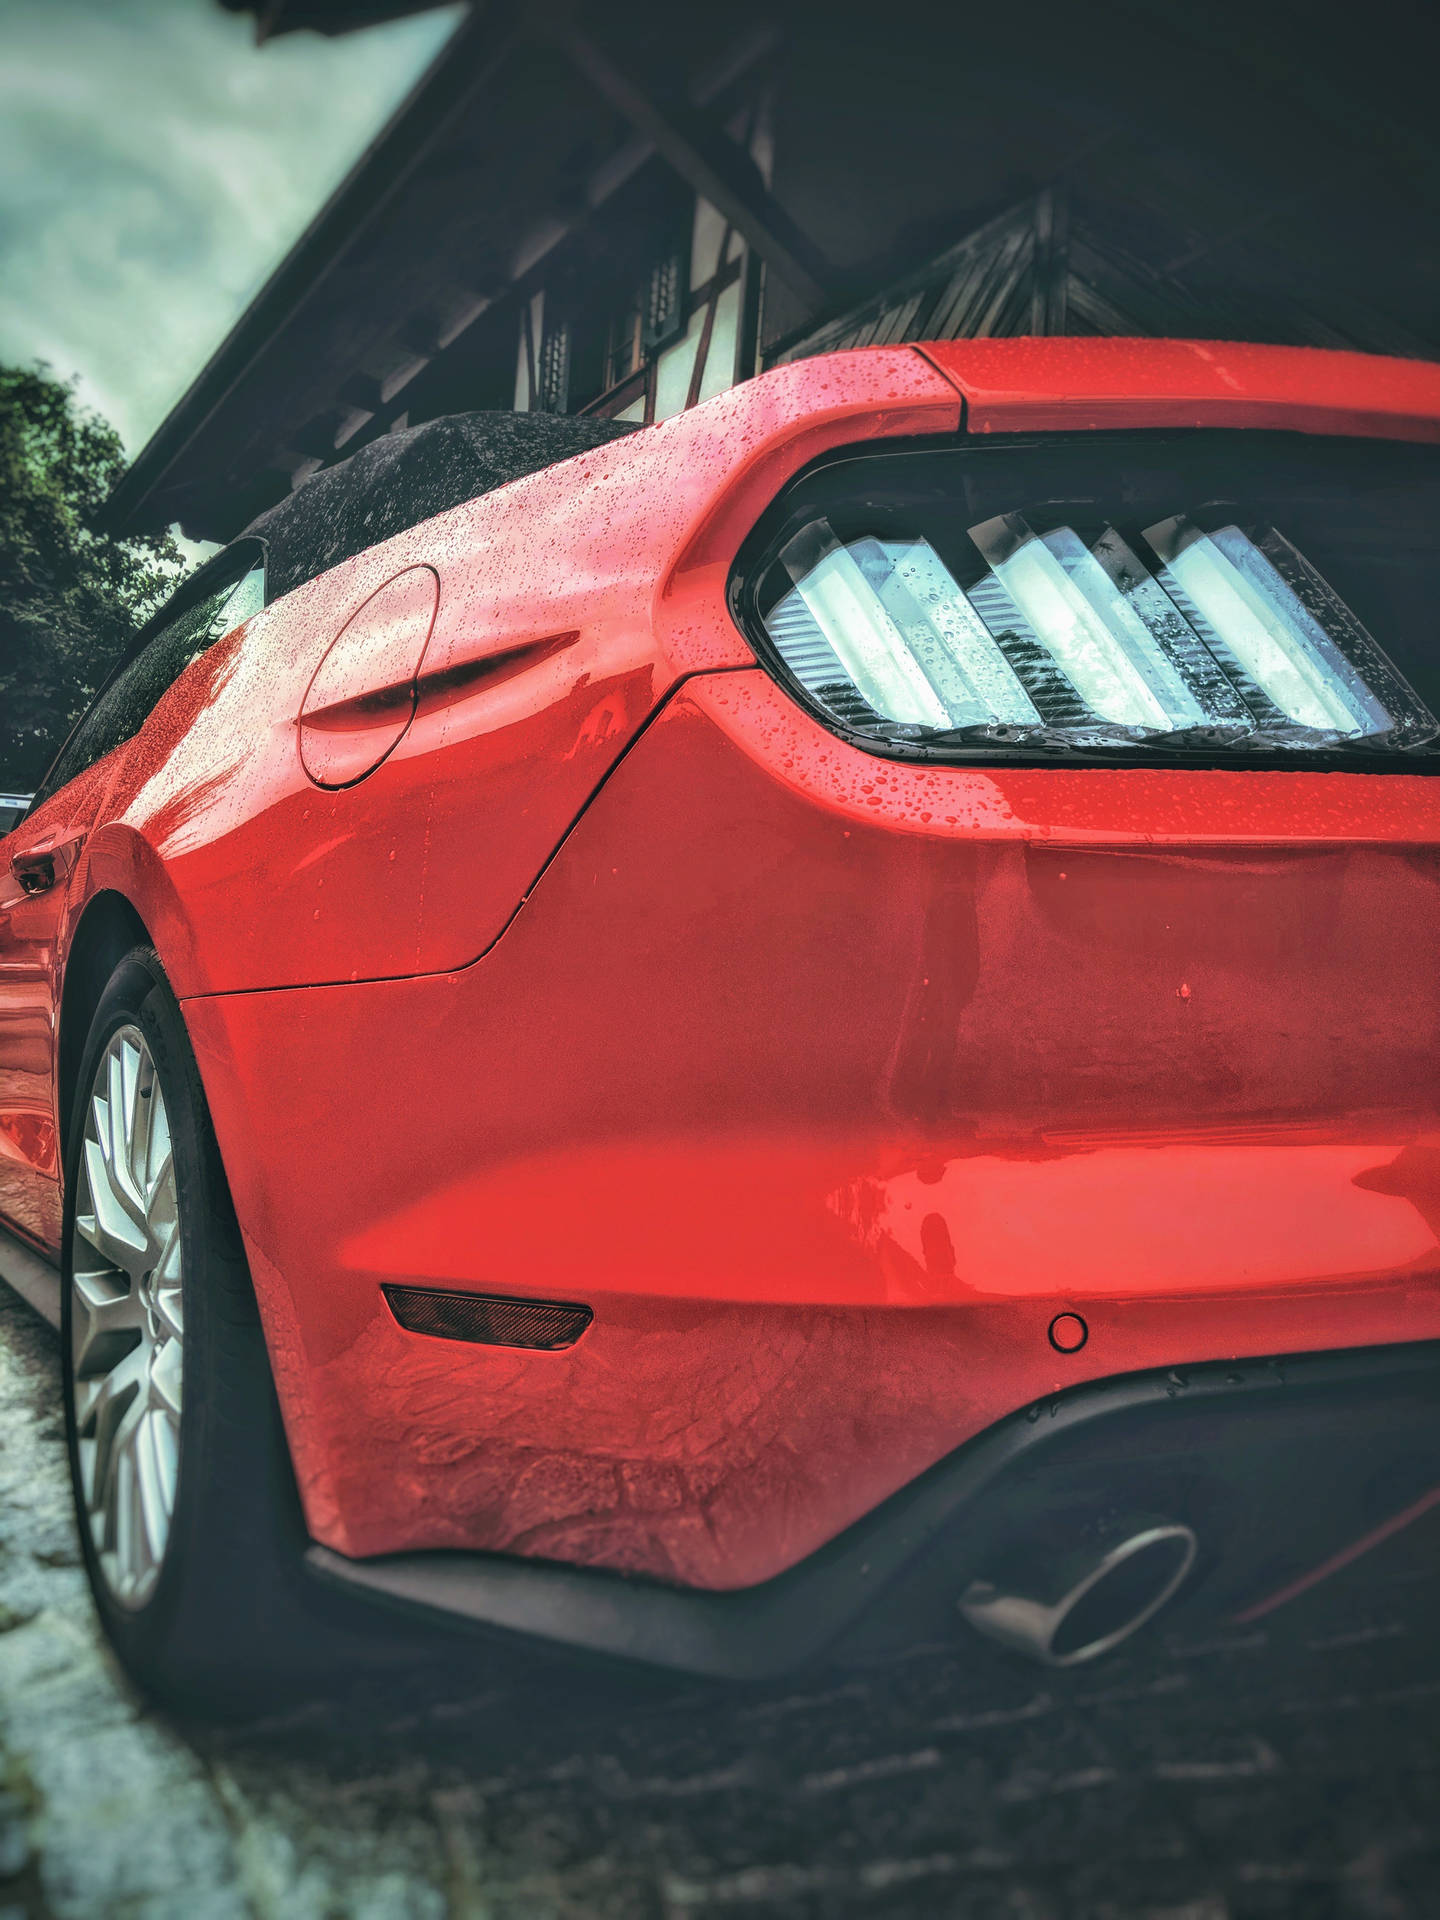 Majestic Mustang Hd - Power Unleashed Background